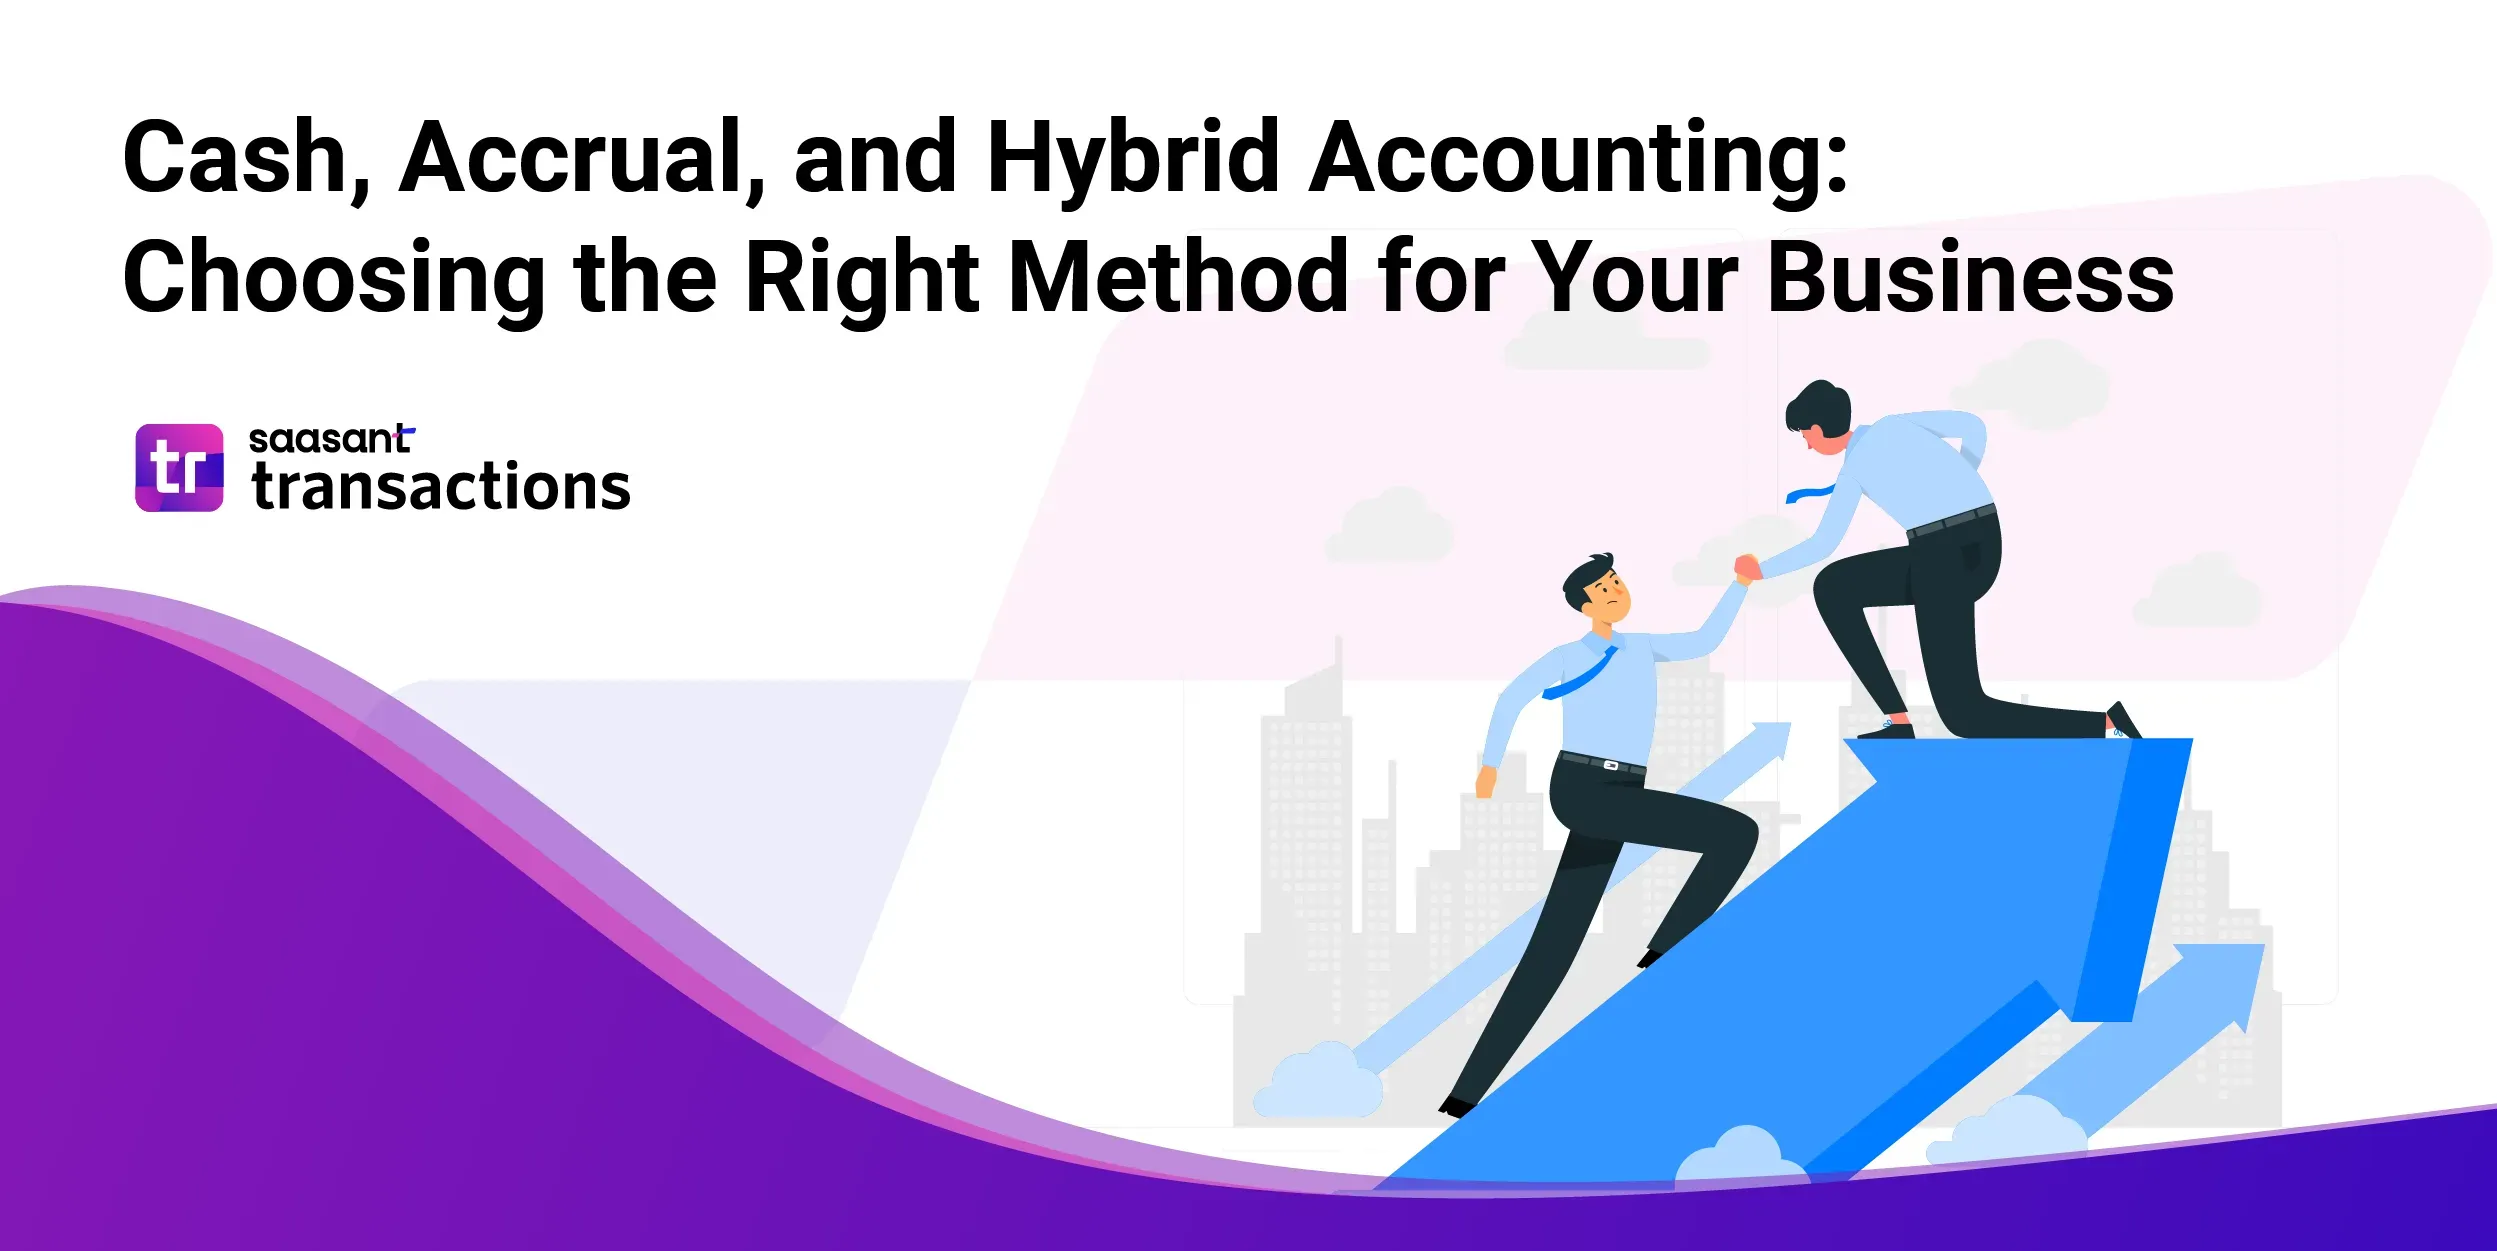 Cash, Accrual, and Hybrid Accounting: Choosing the Right Method for Your Business